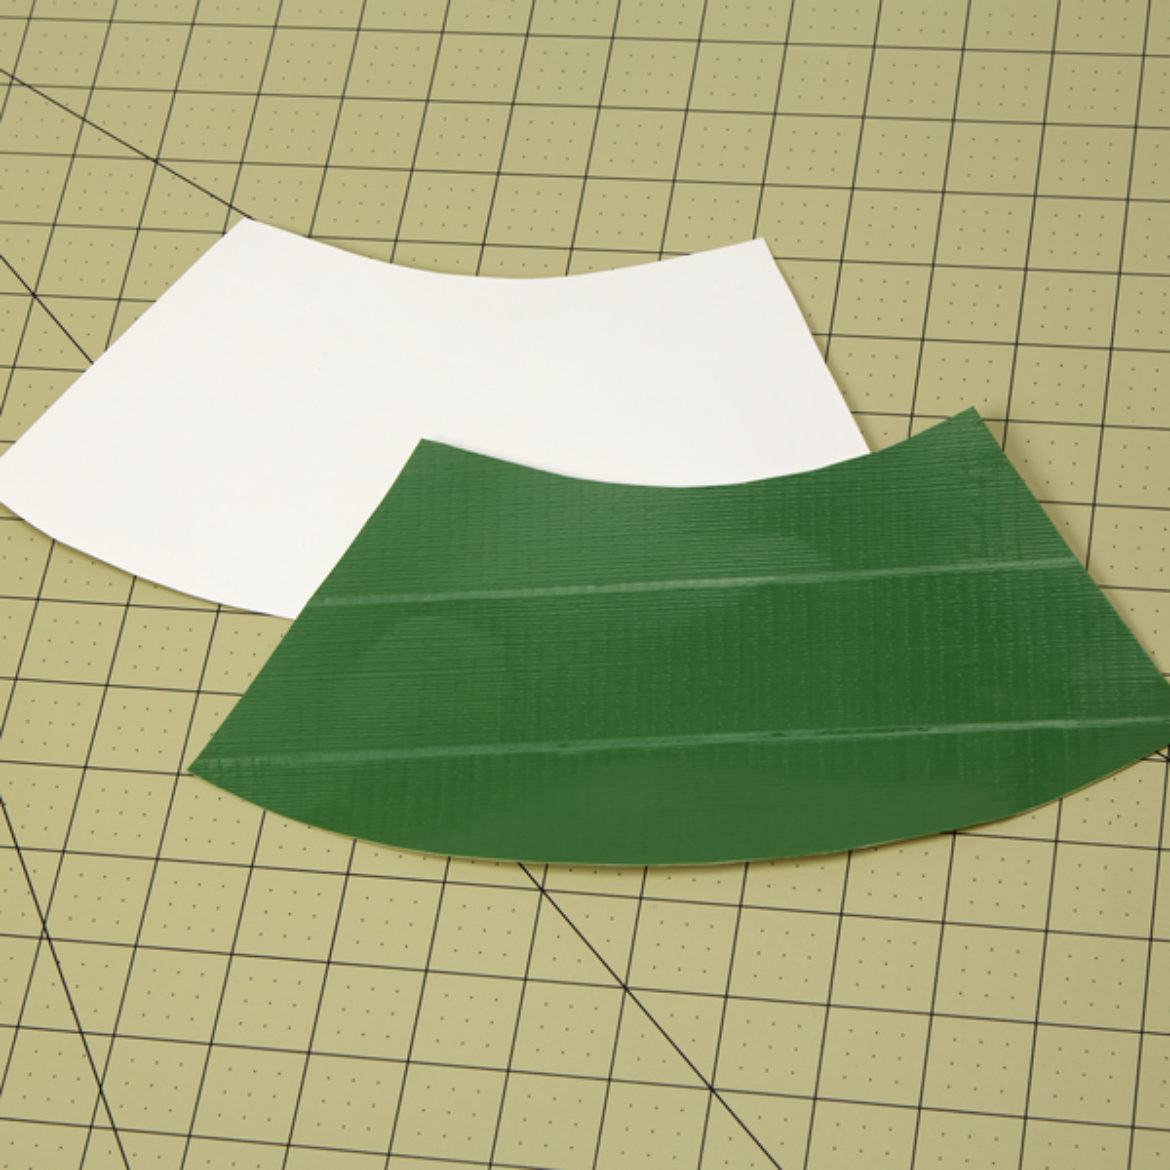 Arch shape cut out of a piece of poster board, then covered in green Duck Tape